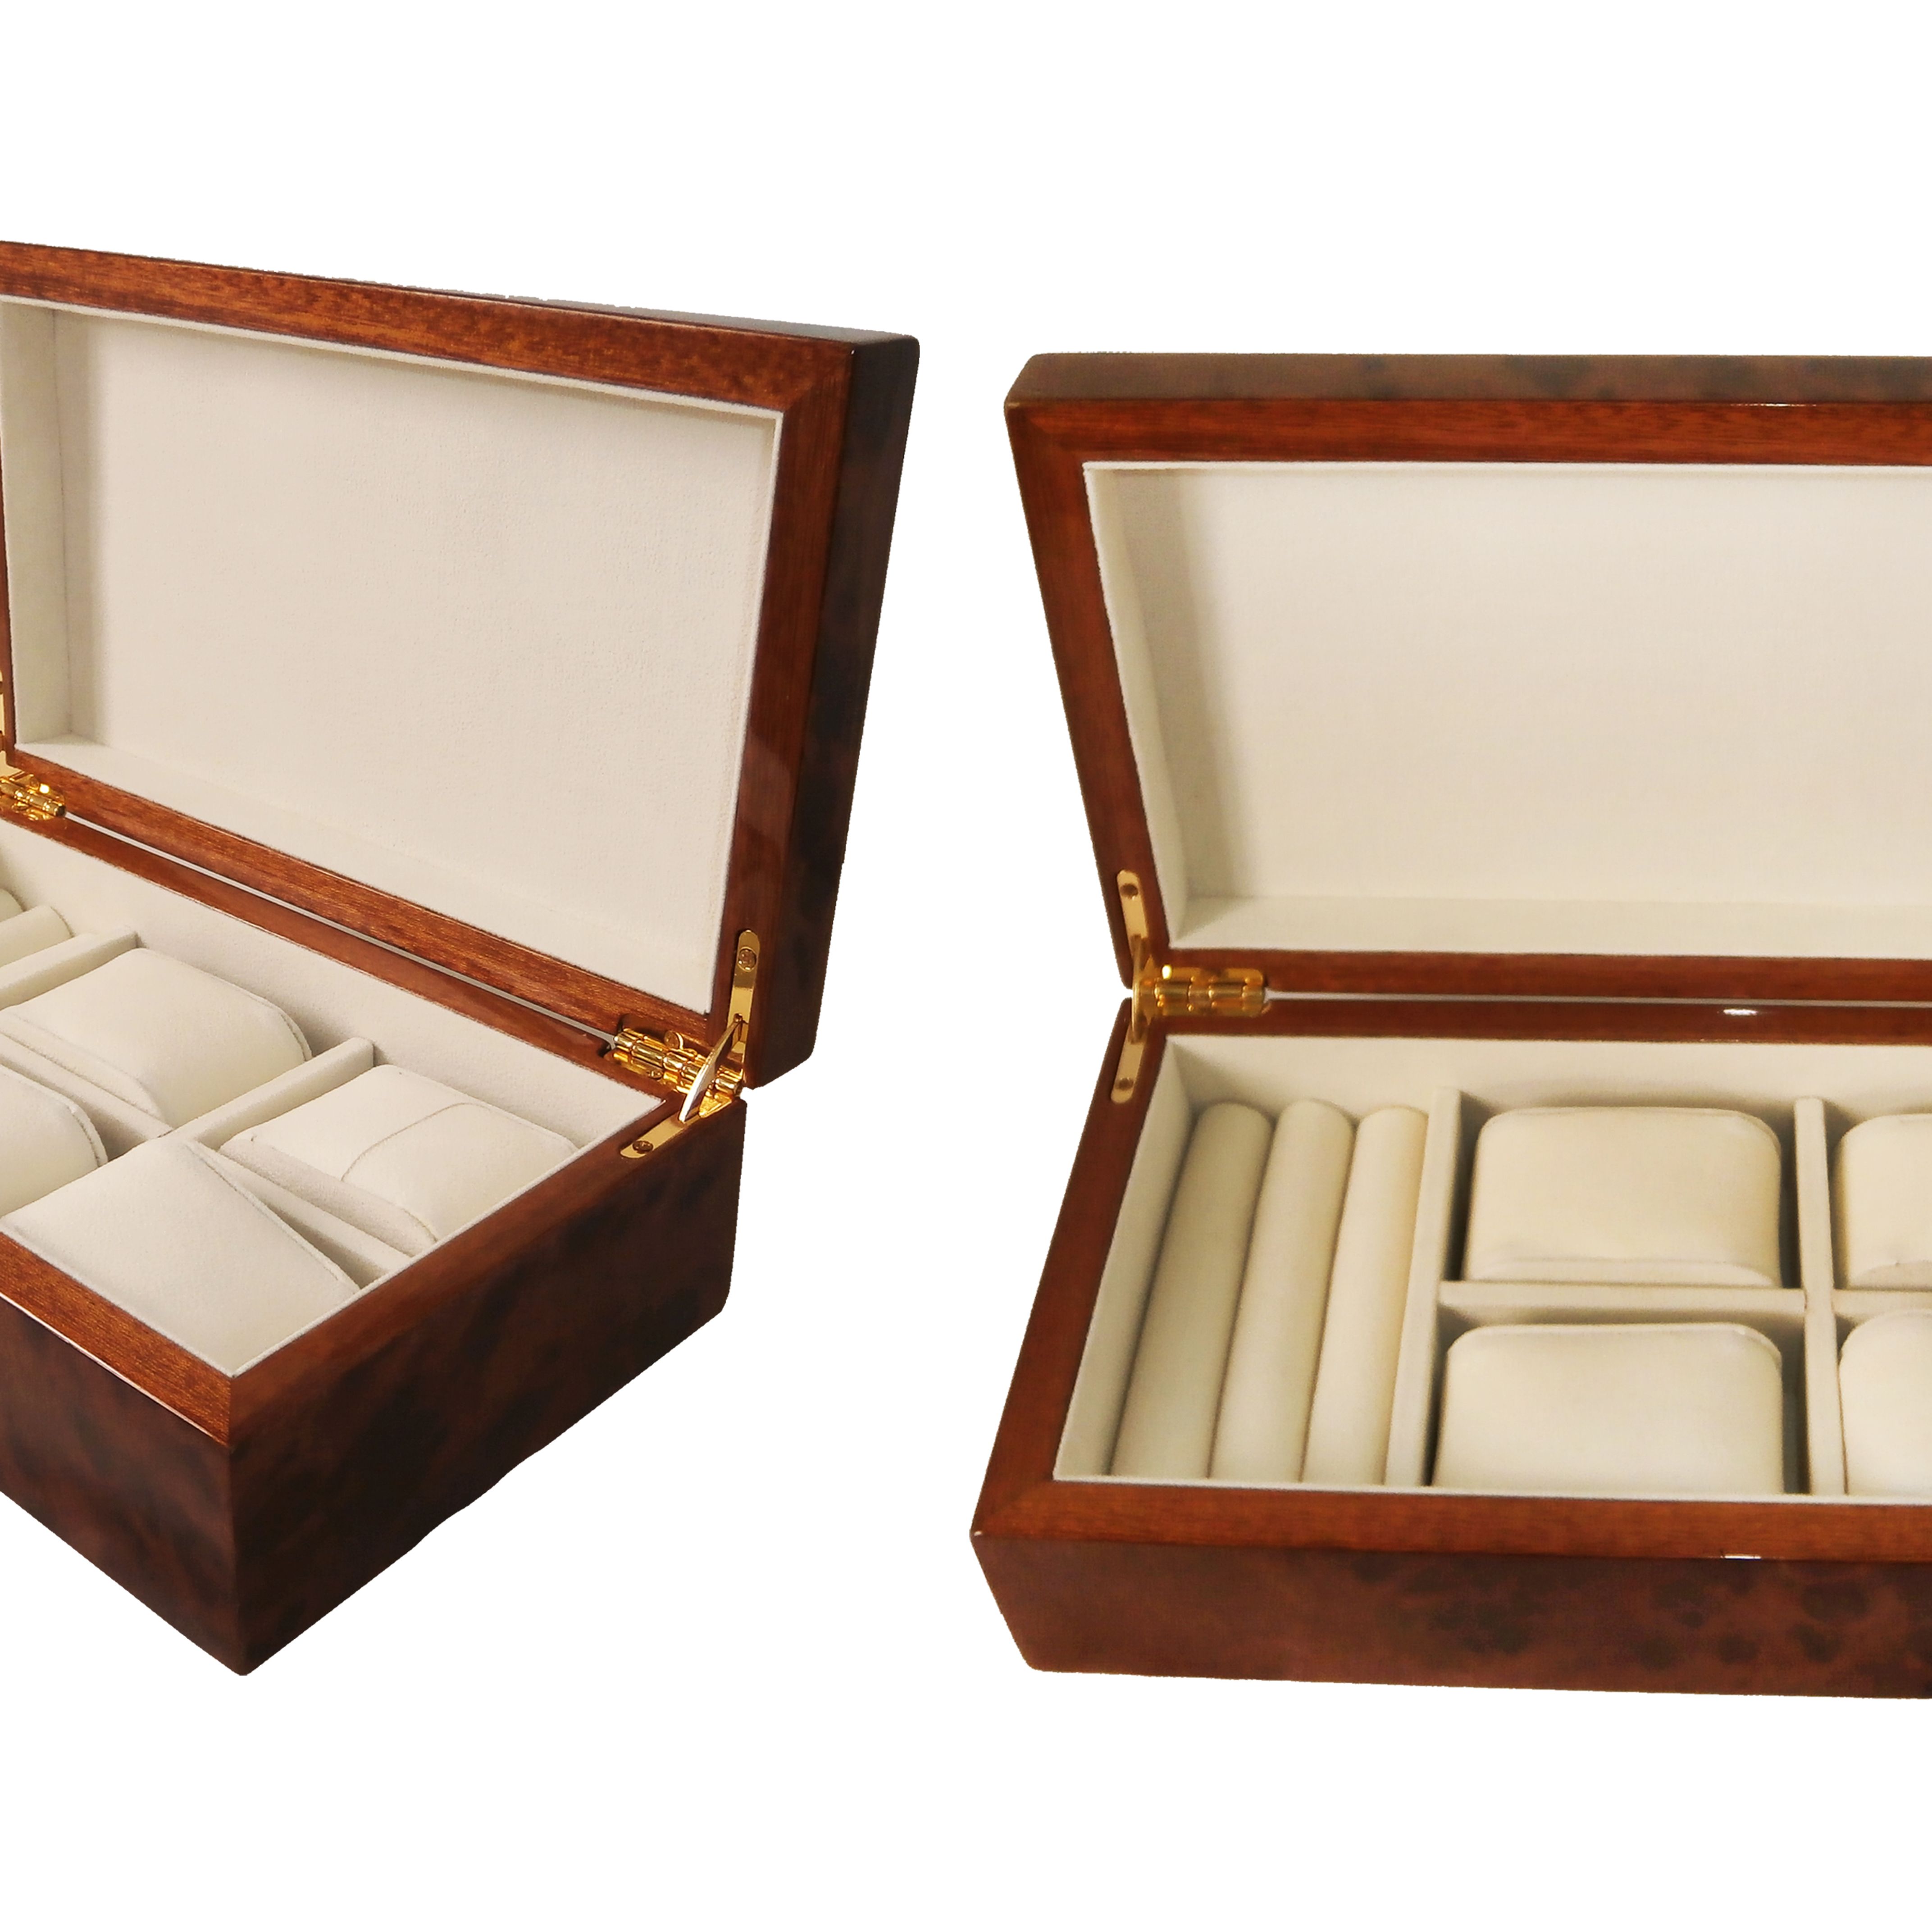 WBX-07 Lacquered Wooden Box